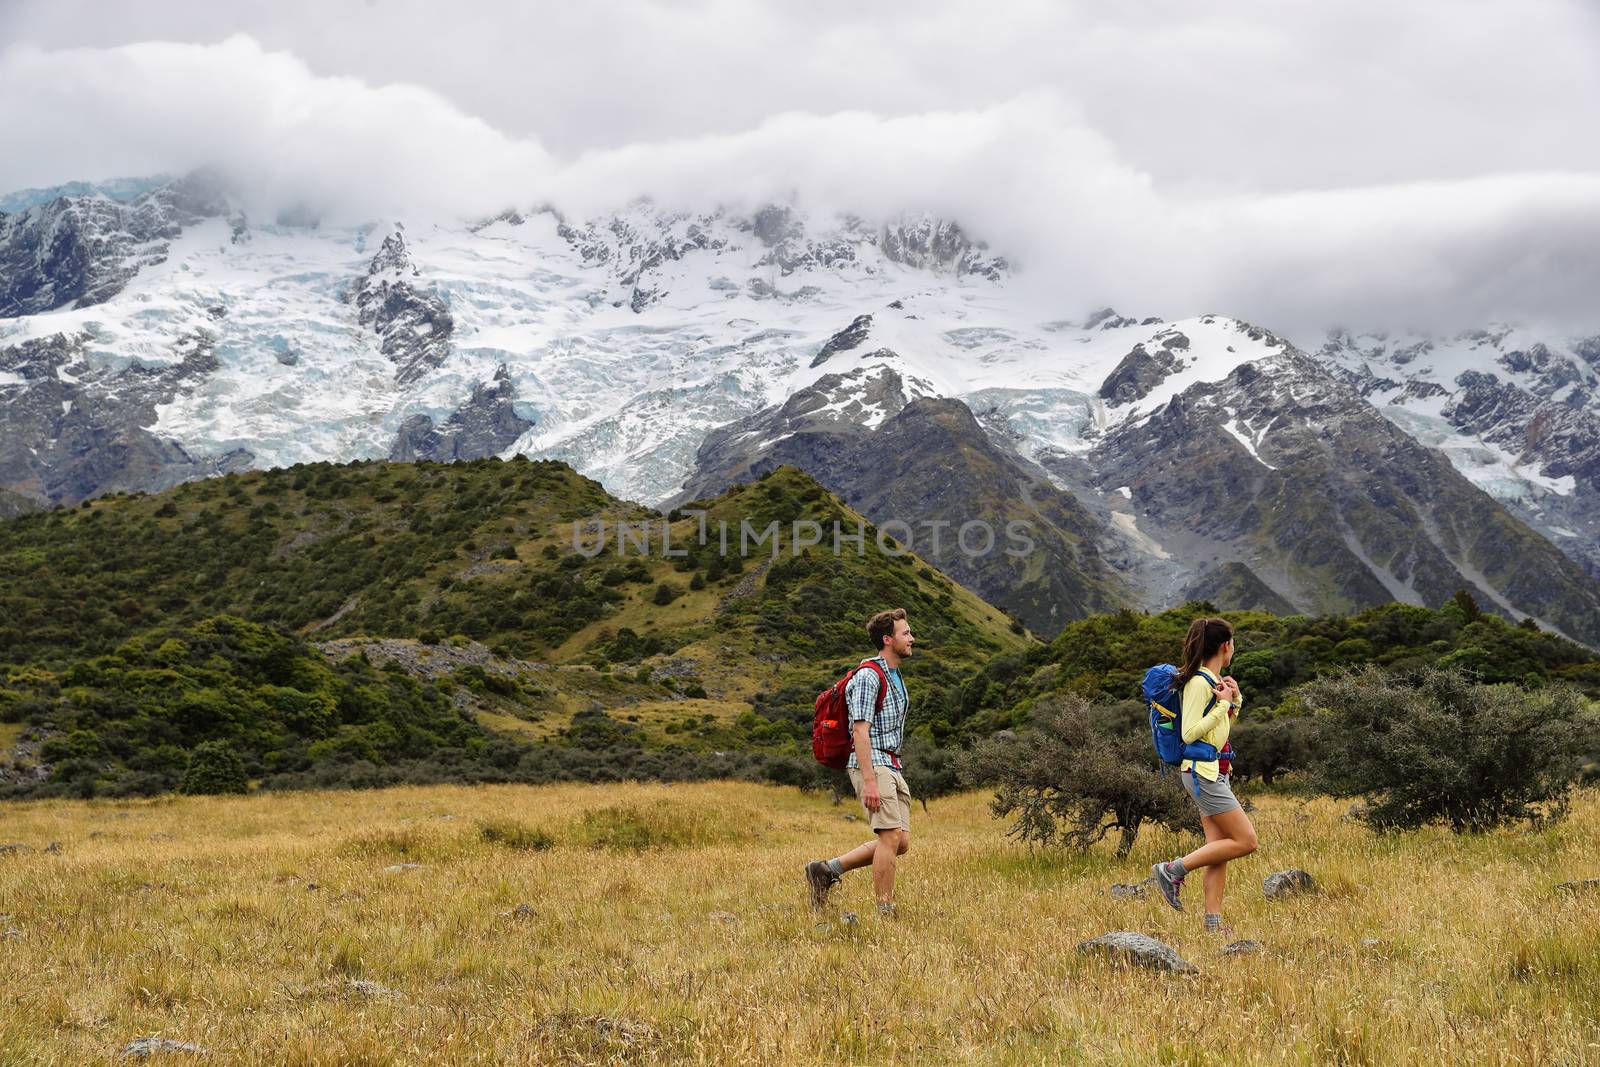 New Zealand travel hikers hiking on snow capped mountains landscape background. Couple trampers walking on Hooker Valley Track, popular tourist destination for summer vacation by Maridav